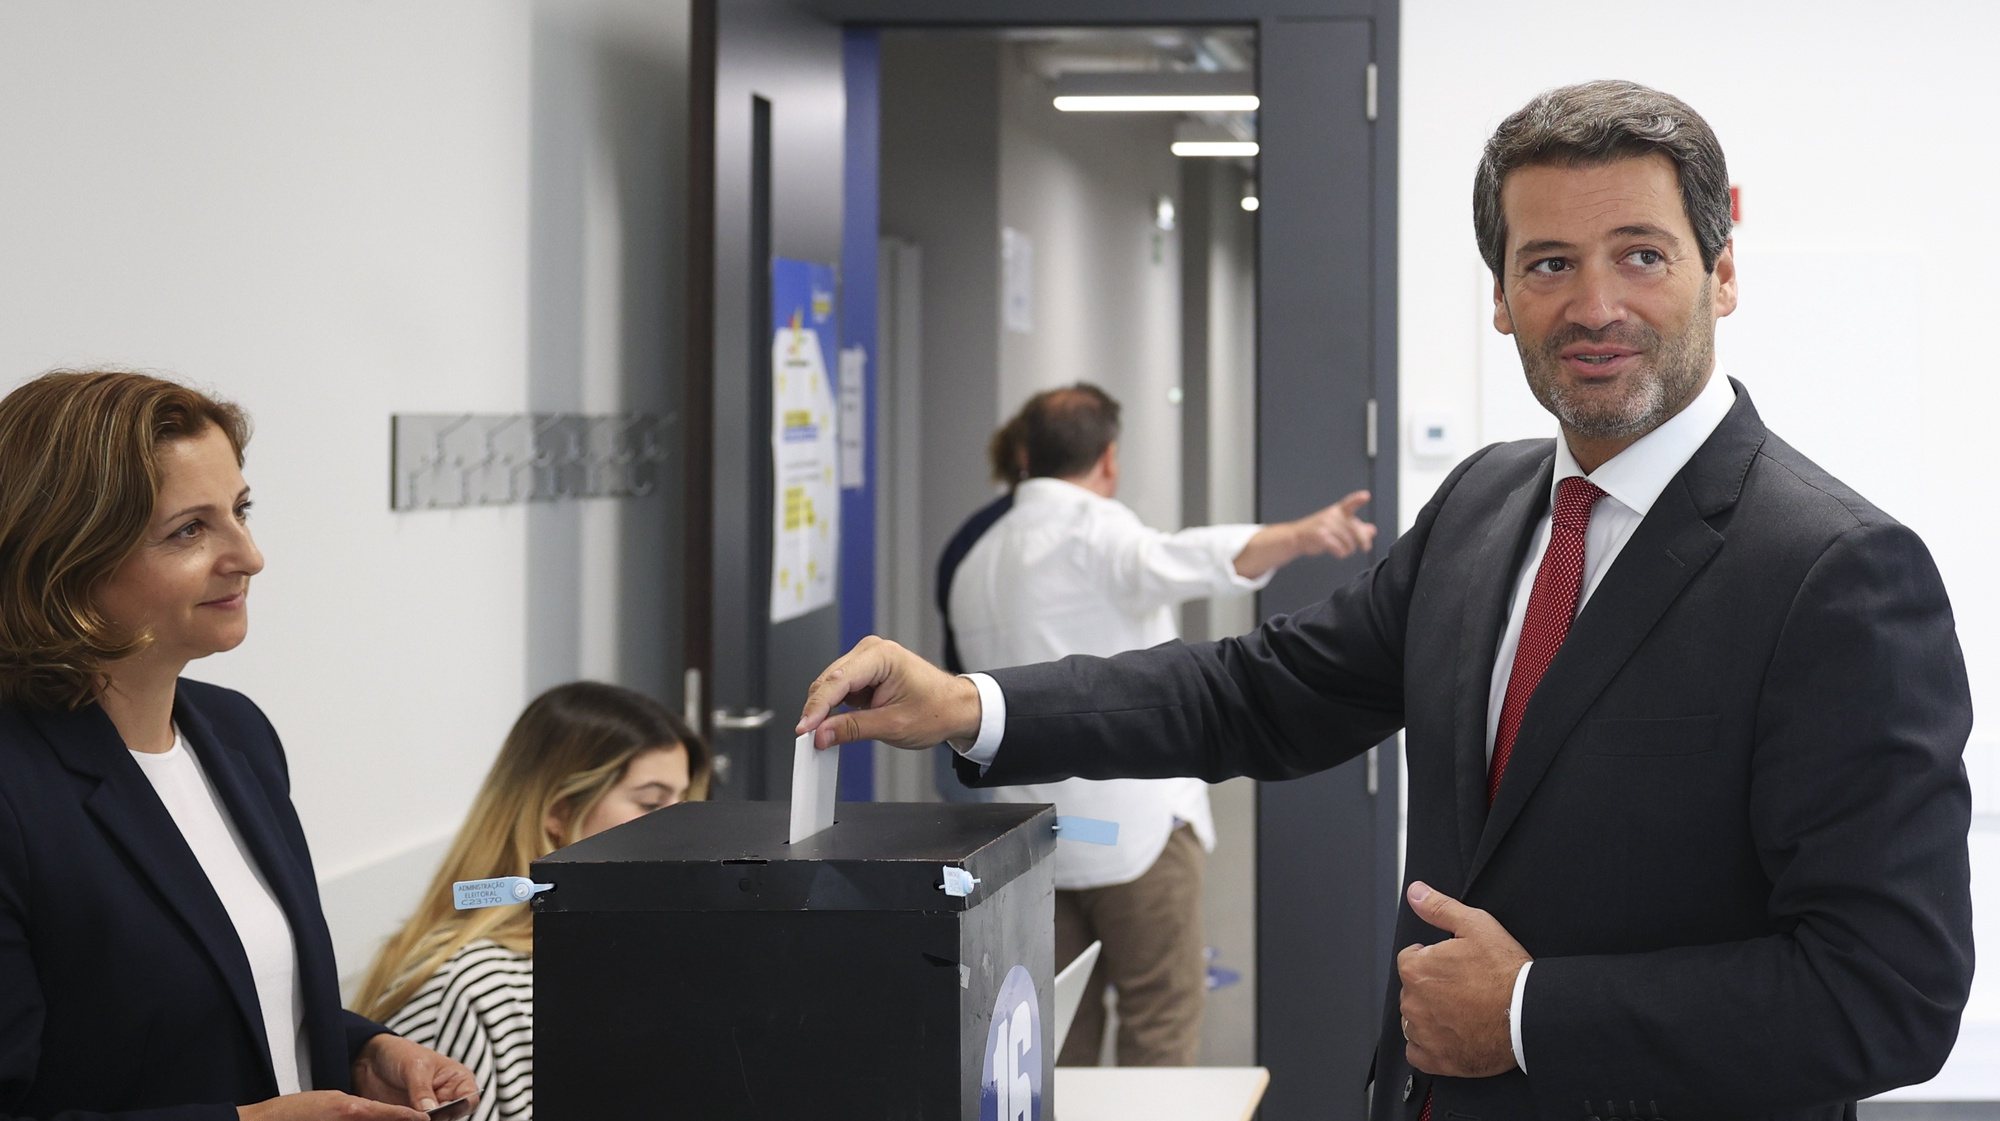 Chega (CH) President Andre Ventura (R) cast his ballot for the European Elections at a polling station in Lisbon, Portugal, 09 June 2024. More than 10.8 million registered voters in Portugal and abroad go to the polls today to choose 21 of the 720 members of the European Parliament. ANTONIO COTRIM/LUSA